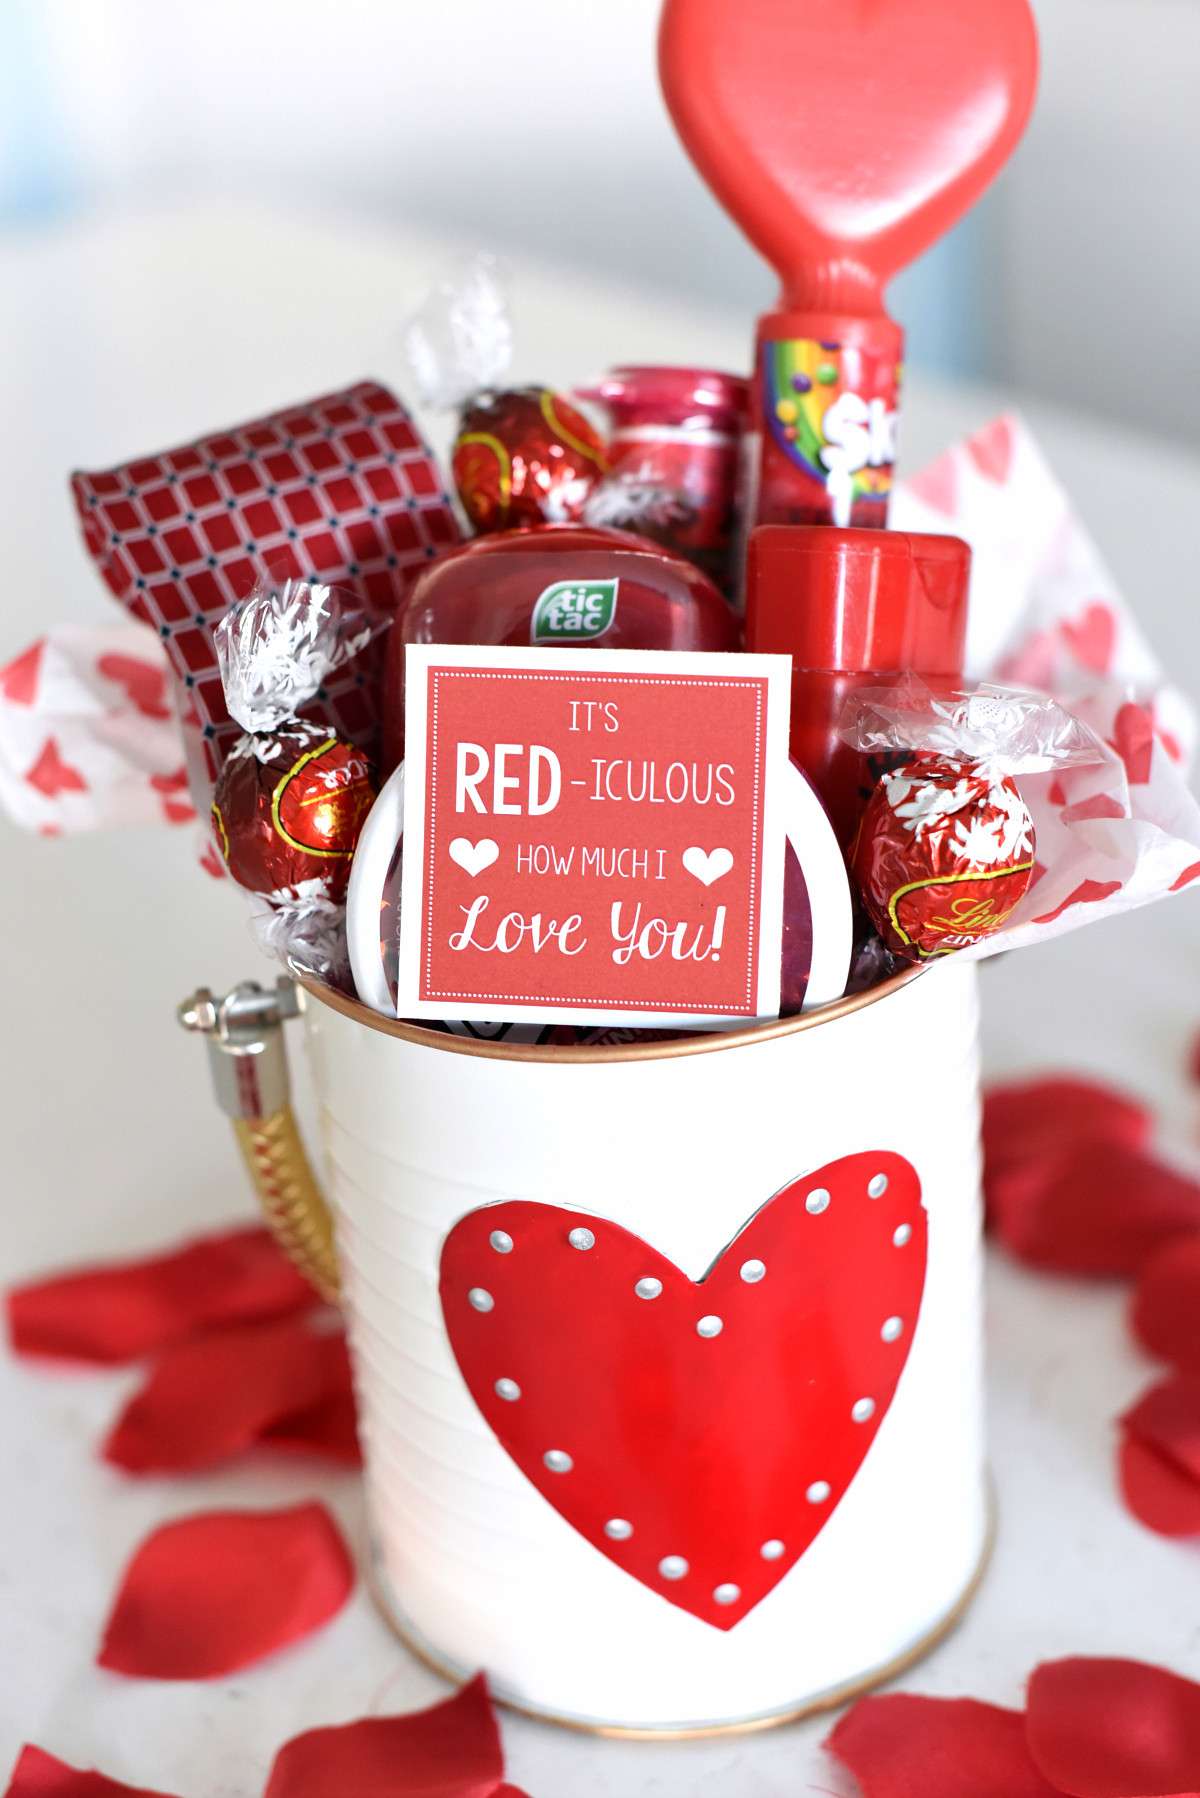 Romantic Gift Ideas For Him Valentines Day
 Cute Valentine s Day Gift Idea RED iculous Basket